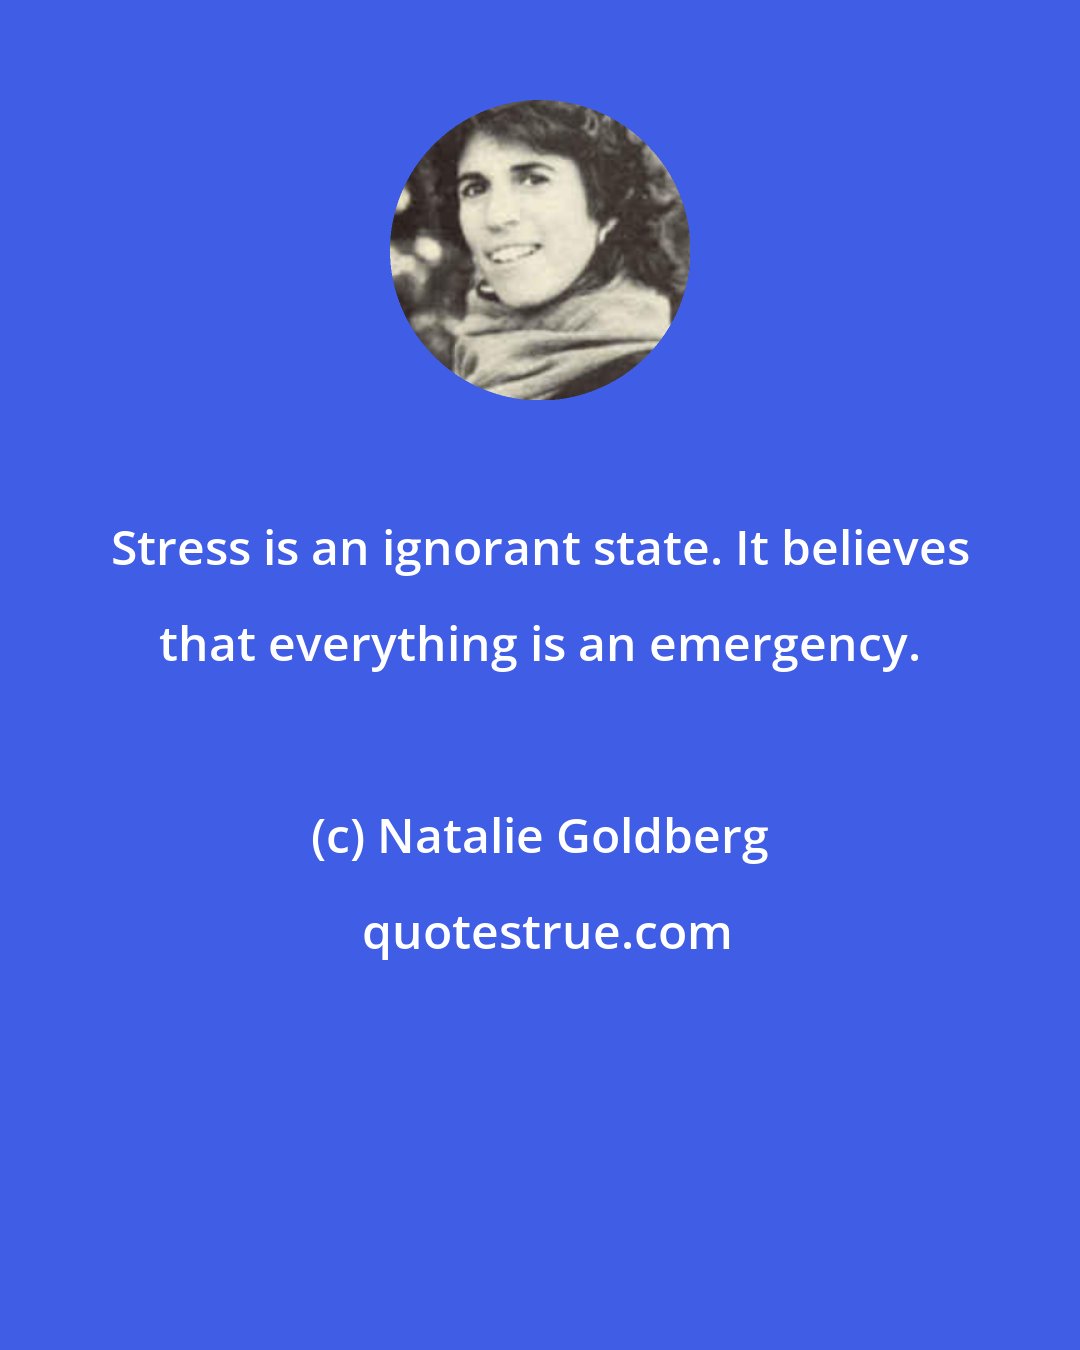 Natalie Goldberg: Stress is an ignorant state. It believes that everything is an emergency.